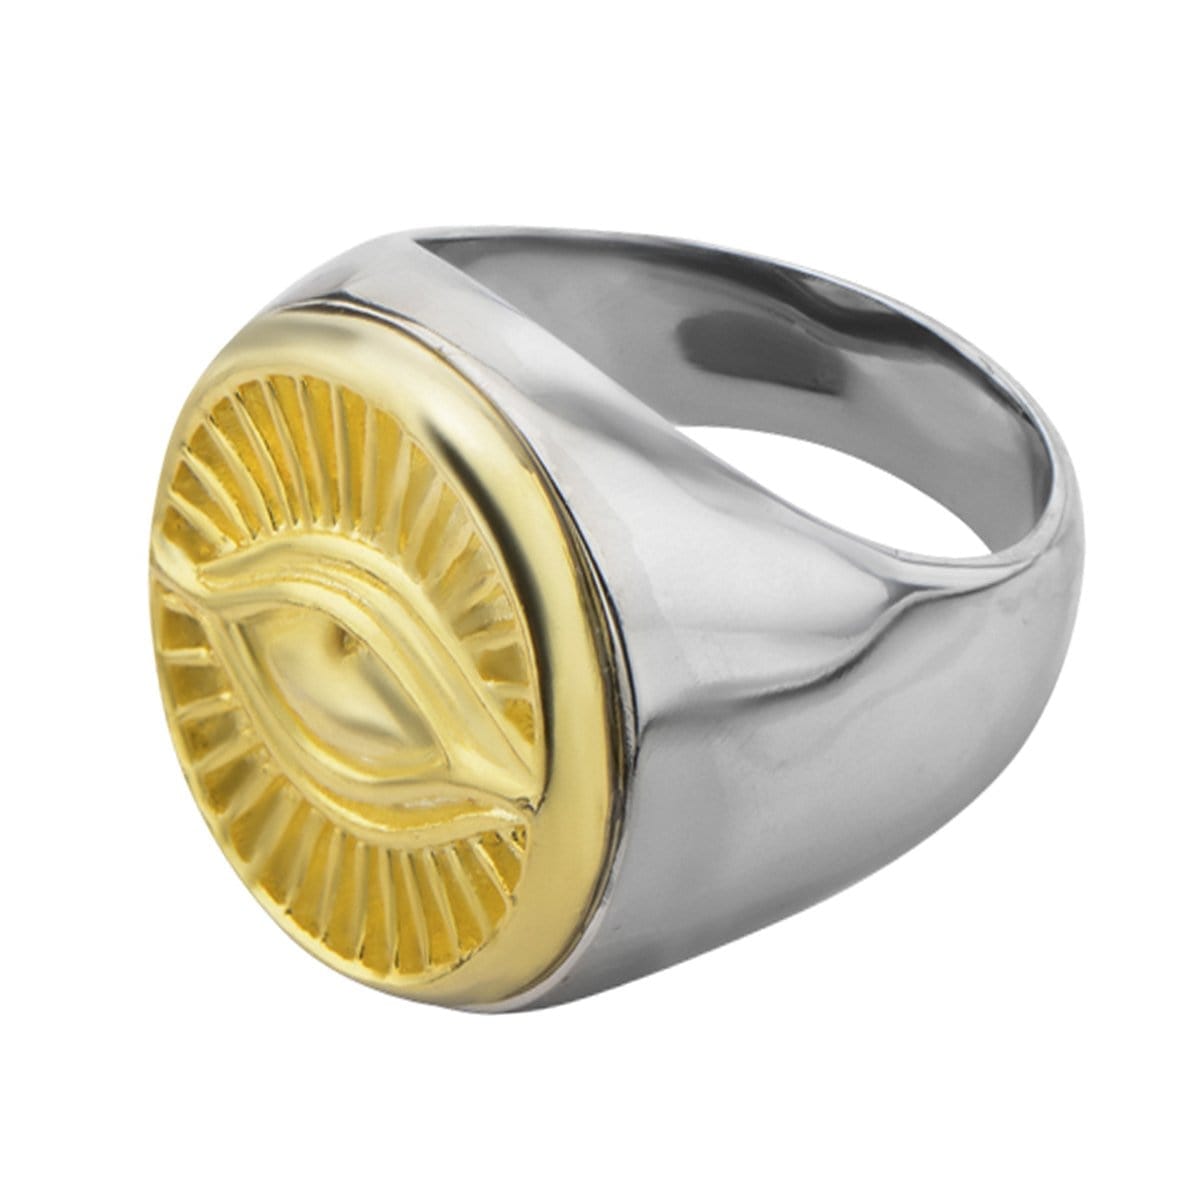 INOX JEWELRY Rings Antique Golden Tone and Silver Tone Stainless Steel All Seeing Eye of God Ring